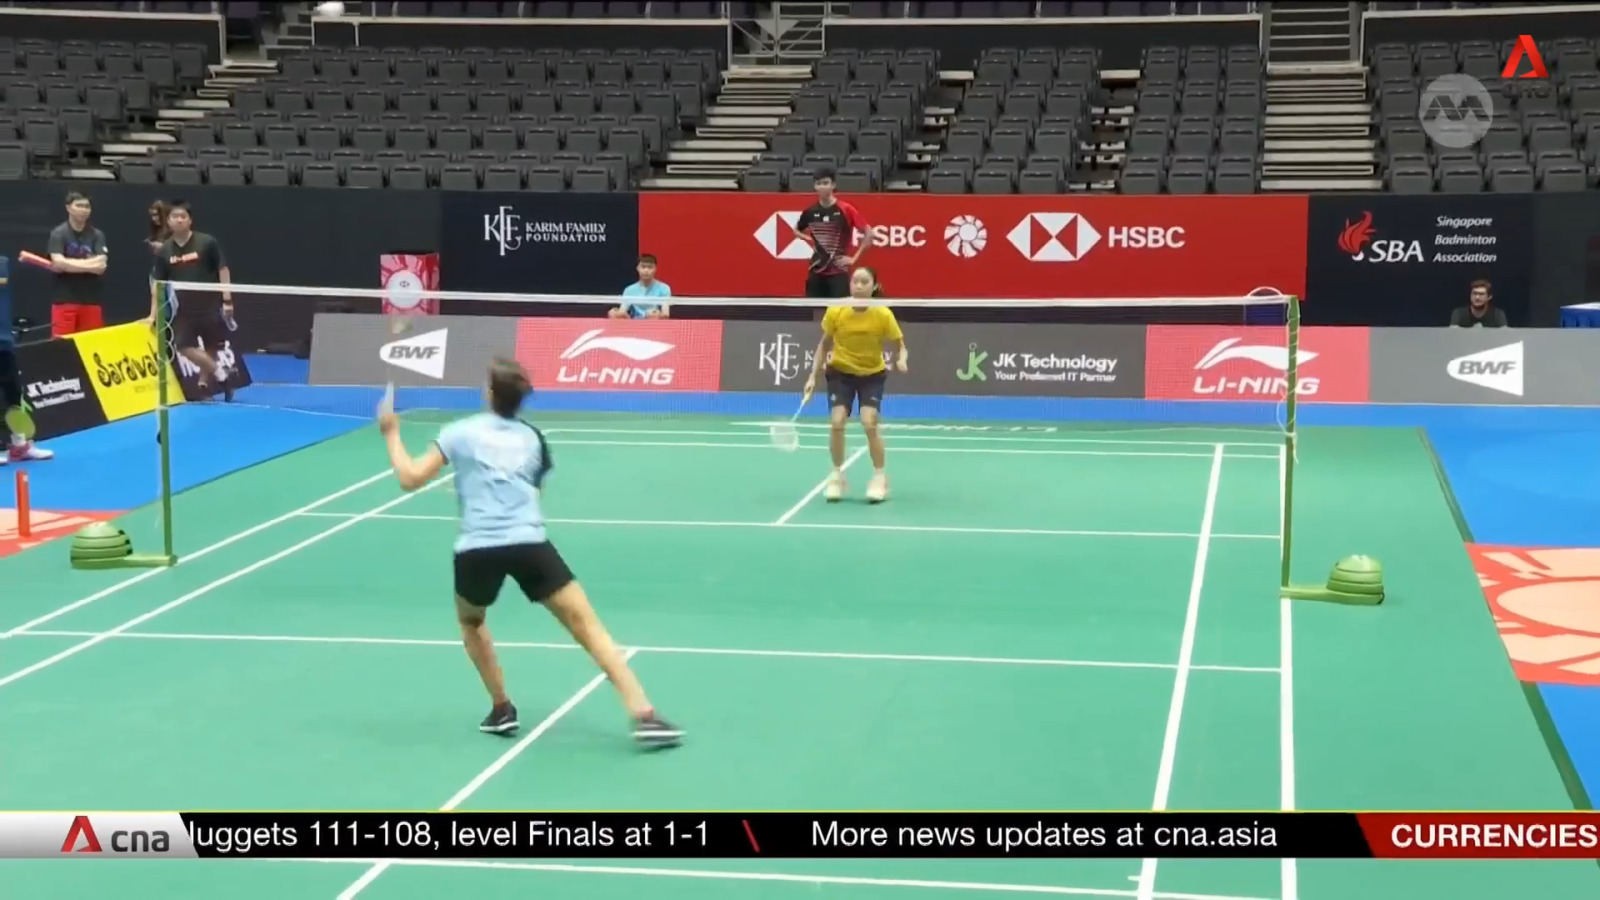 Singapore Badminton Open Top players to vie for US$850,000 prize purse Video